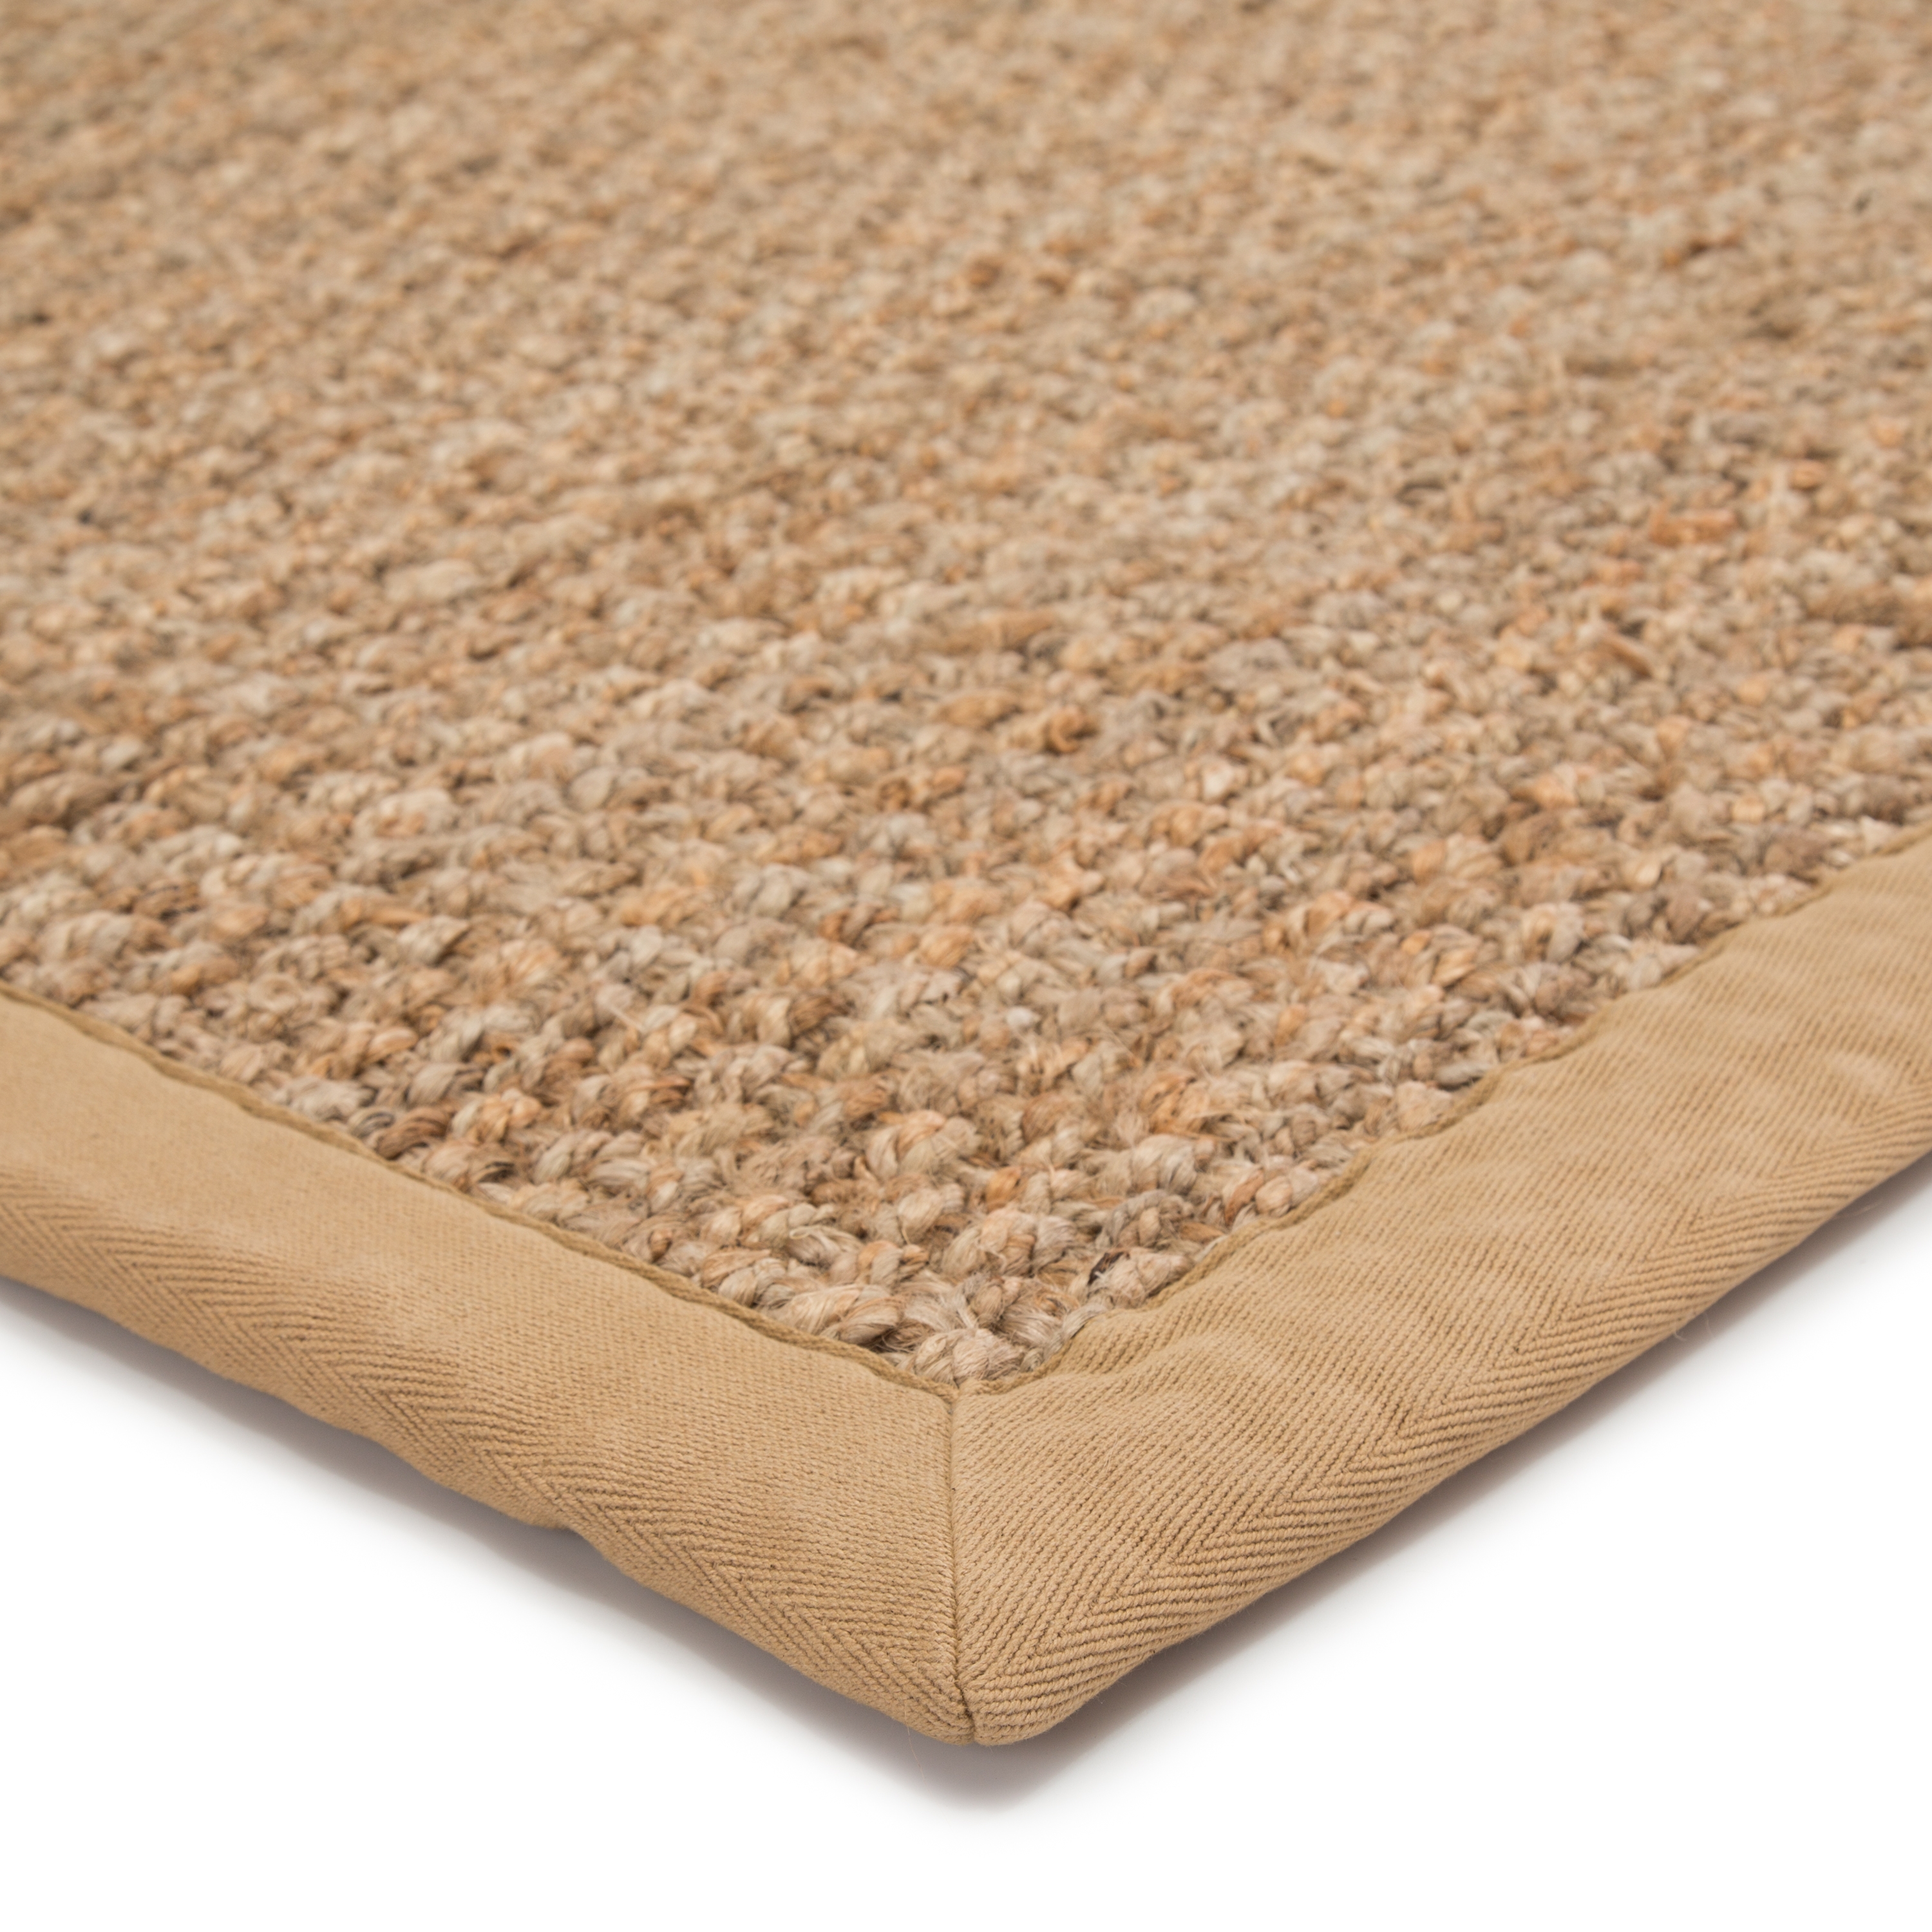 Adesina Natural Solid Beige Area Rug (8' X 10') - Image 1